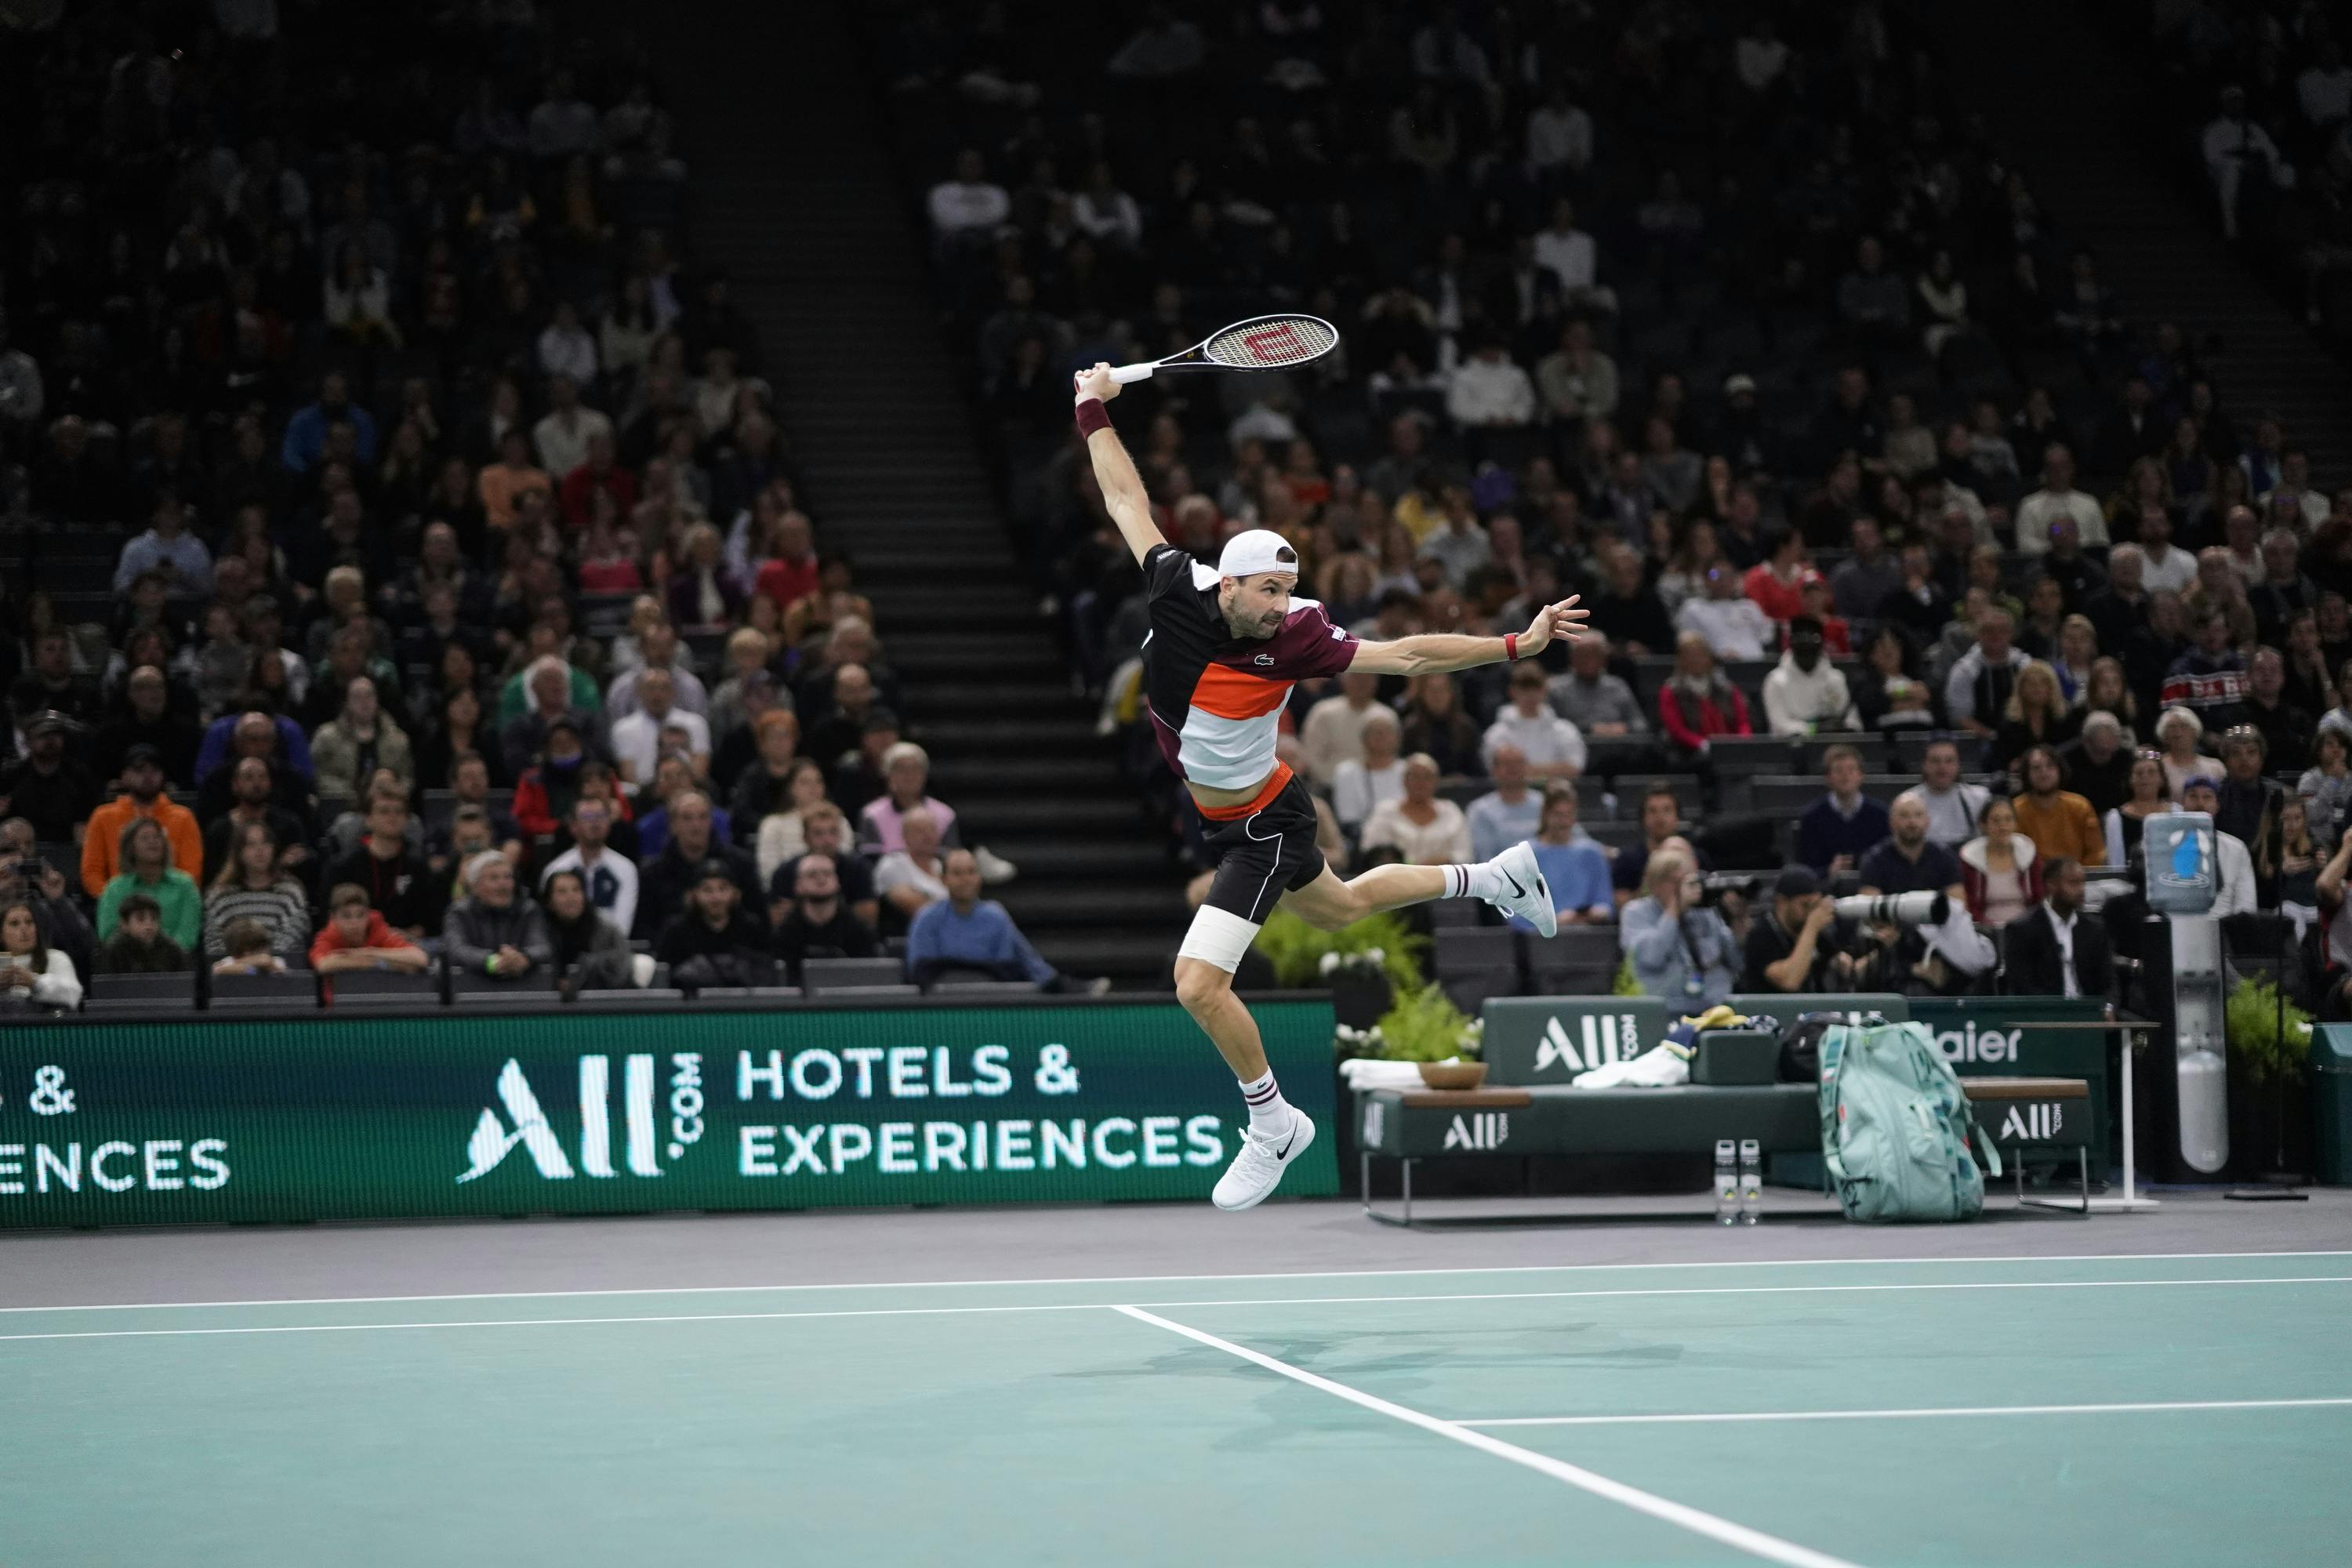 2023 Rolex Paris Masters: schedule, streaming services, and more